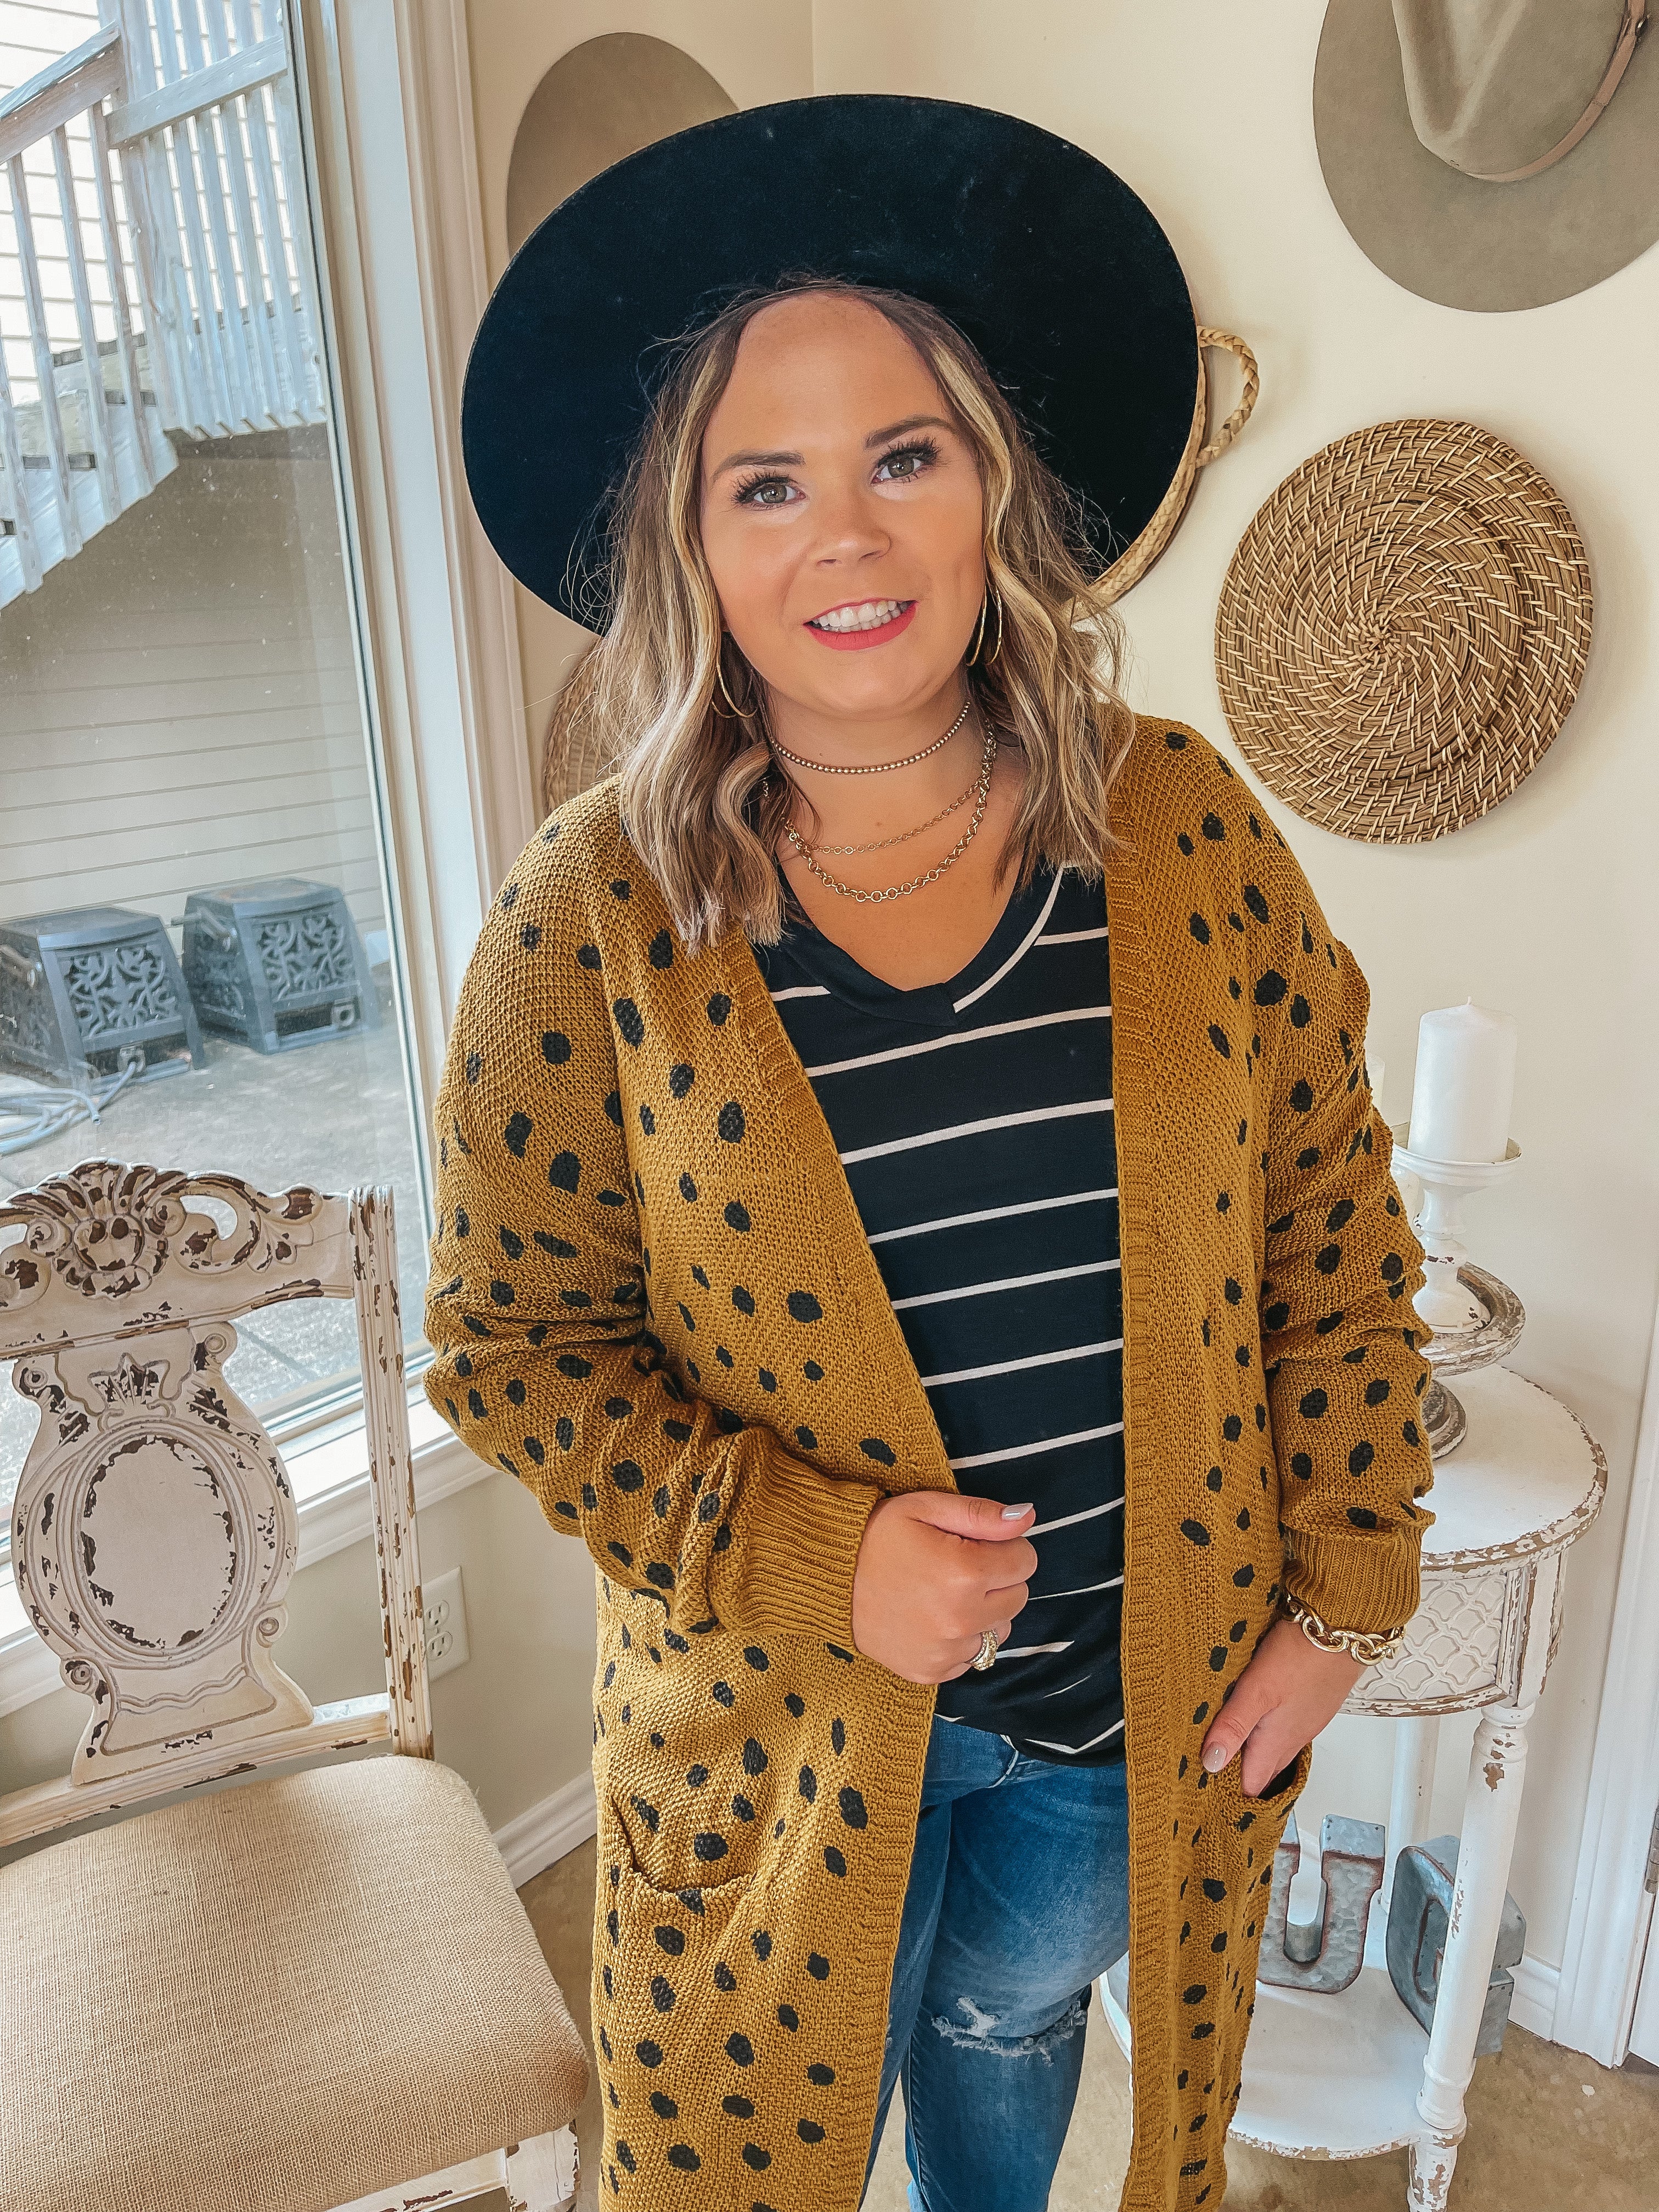 Boho Lifestyle Long Sleeve Polka Dot Duster Cardigan in Mustard Yellow - Giddy Up Glamour Boutique